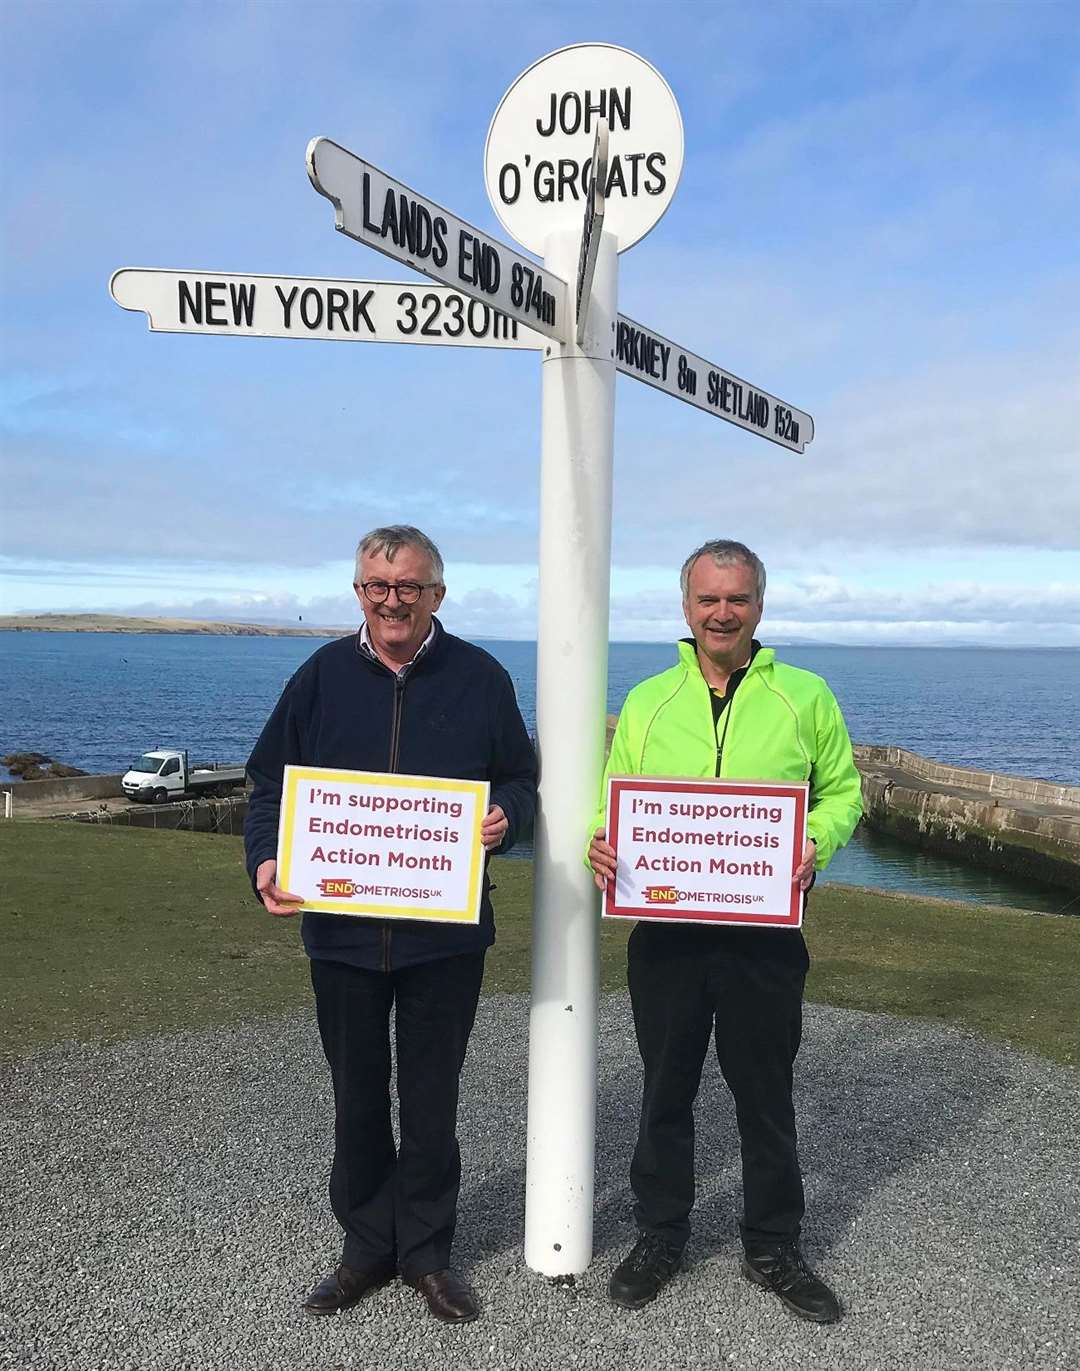 MP Jamie Stone (left) and local council candidate and chairman of CHAT Ron Gunn supported the Endo March event at John O'Groats.